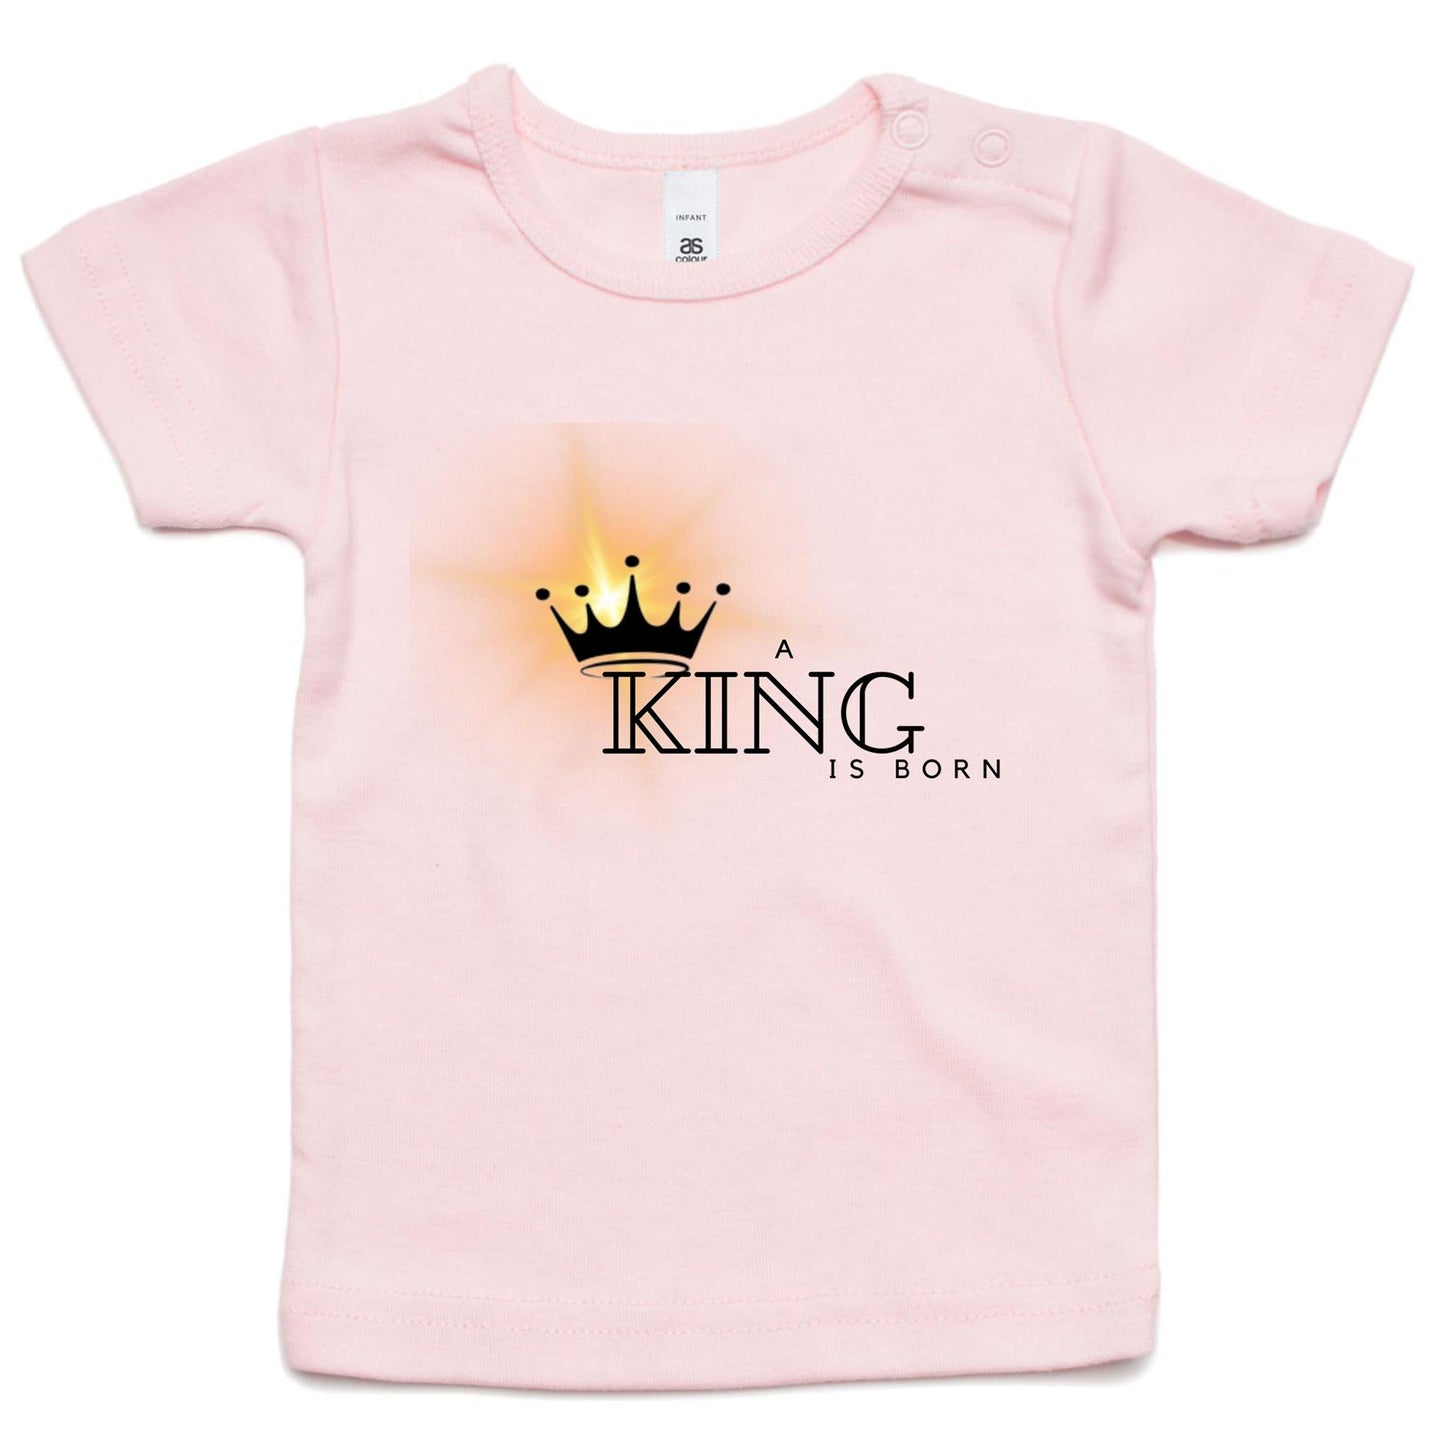 A King Is Born Baby Wee Tee